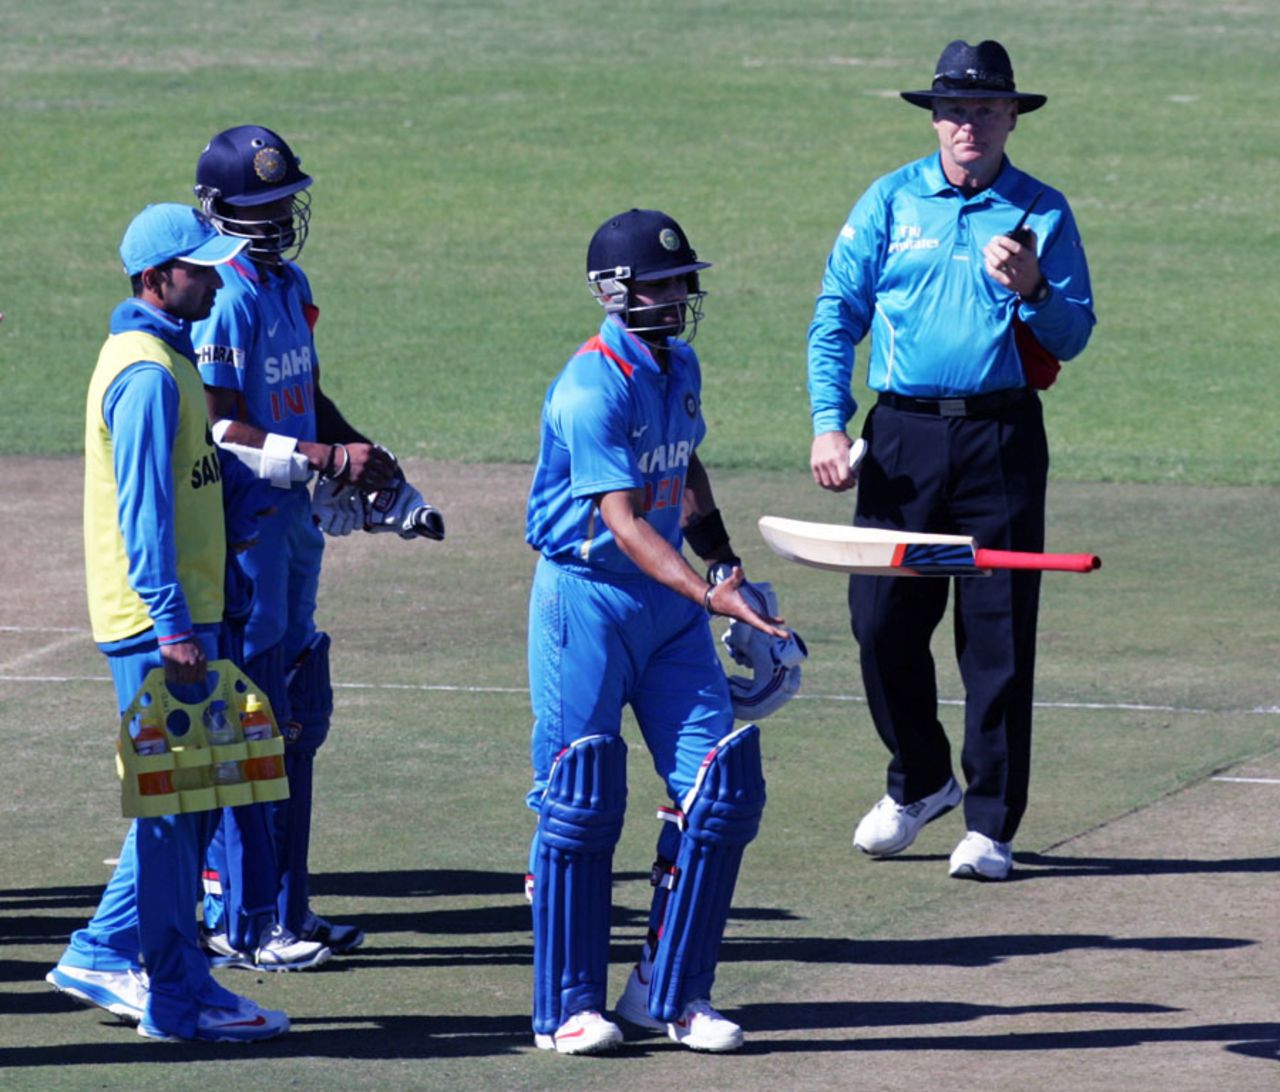 Virat Kohli tosses his bat in disappointment after being given out, Zimbabwe v India, 2nd ODI, Harare, July 26, 2013